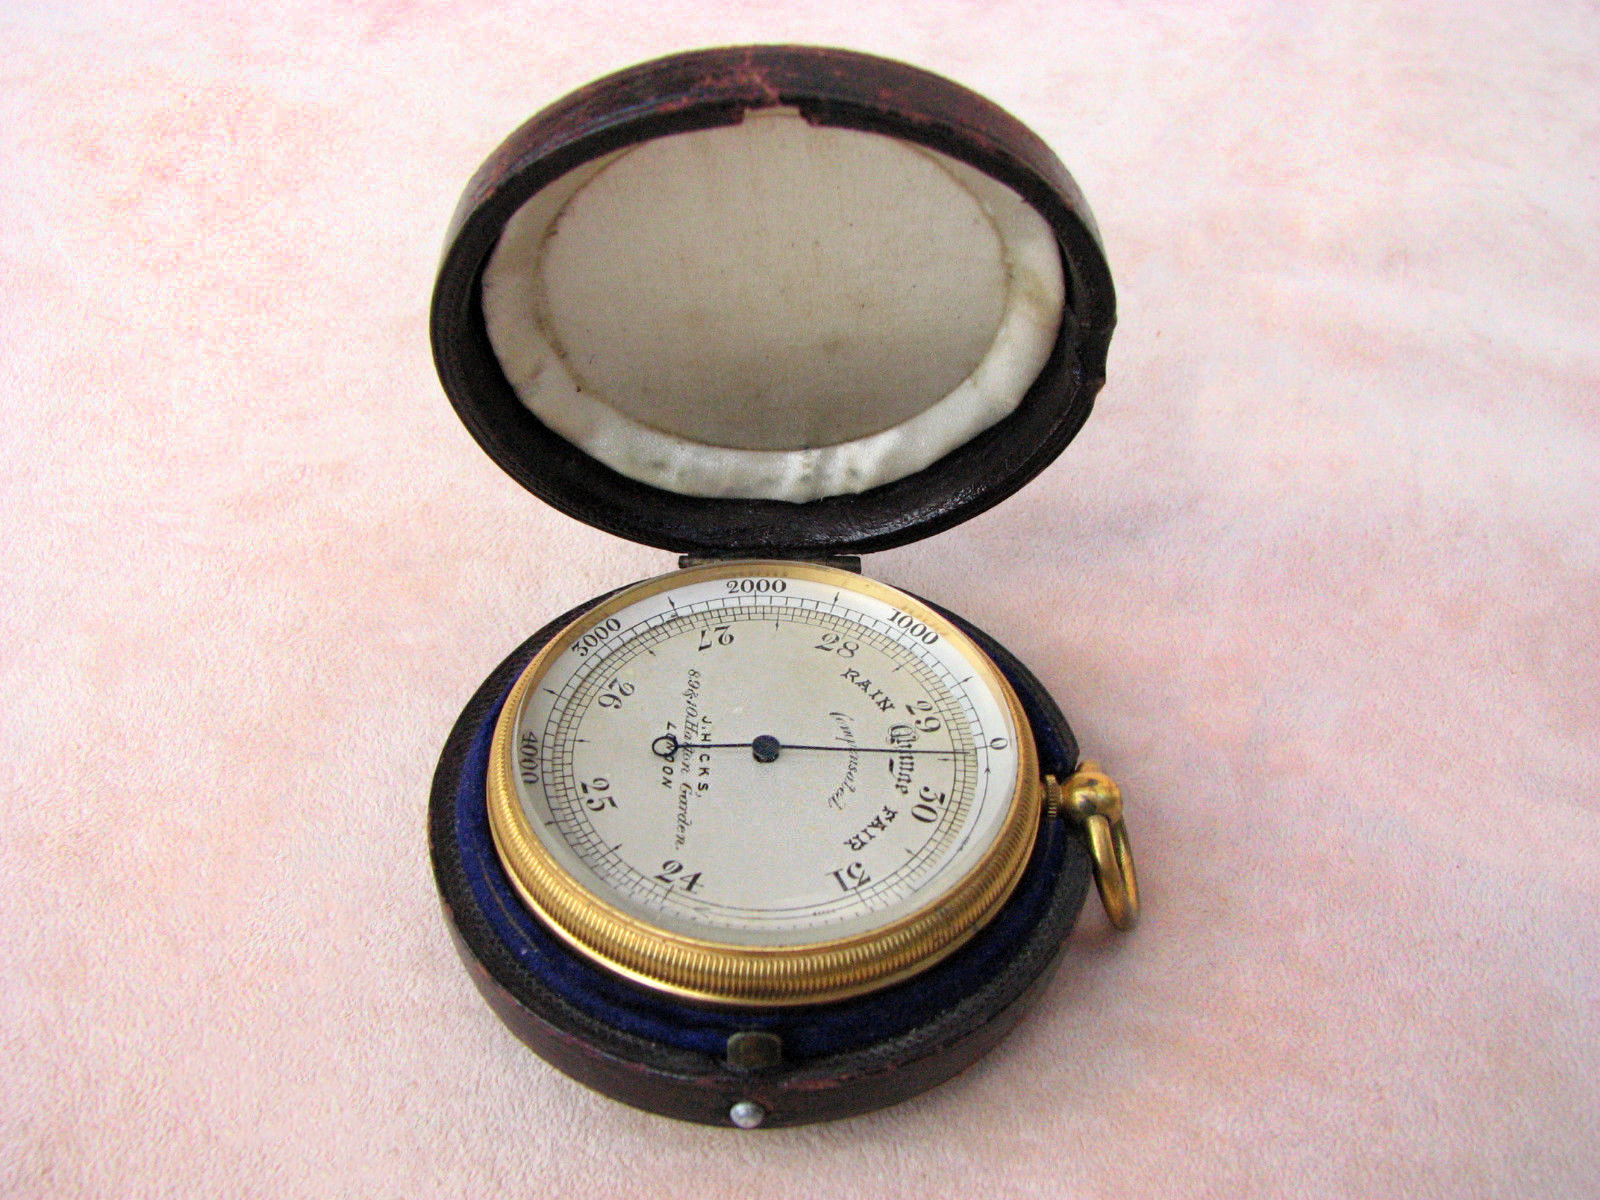 19th century J. Hicks pocket barometer and altimeter with case